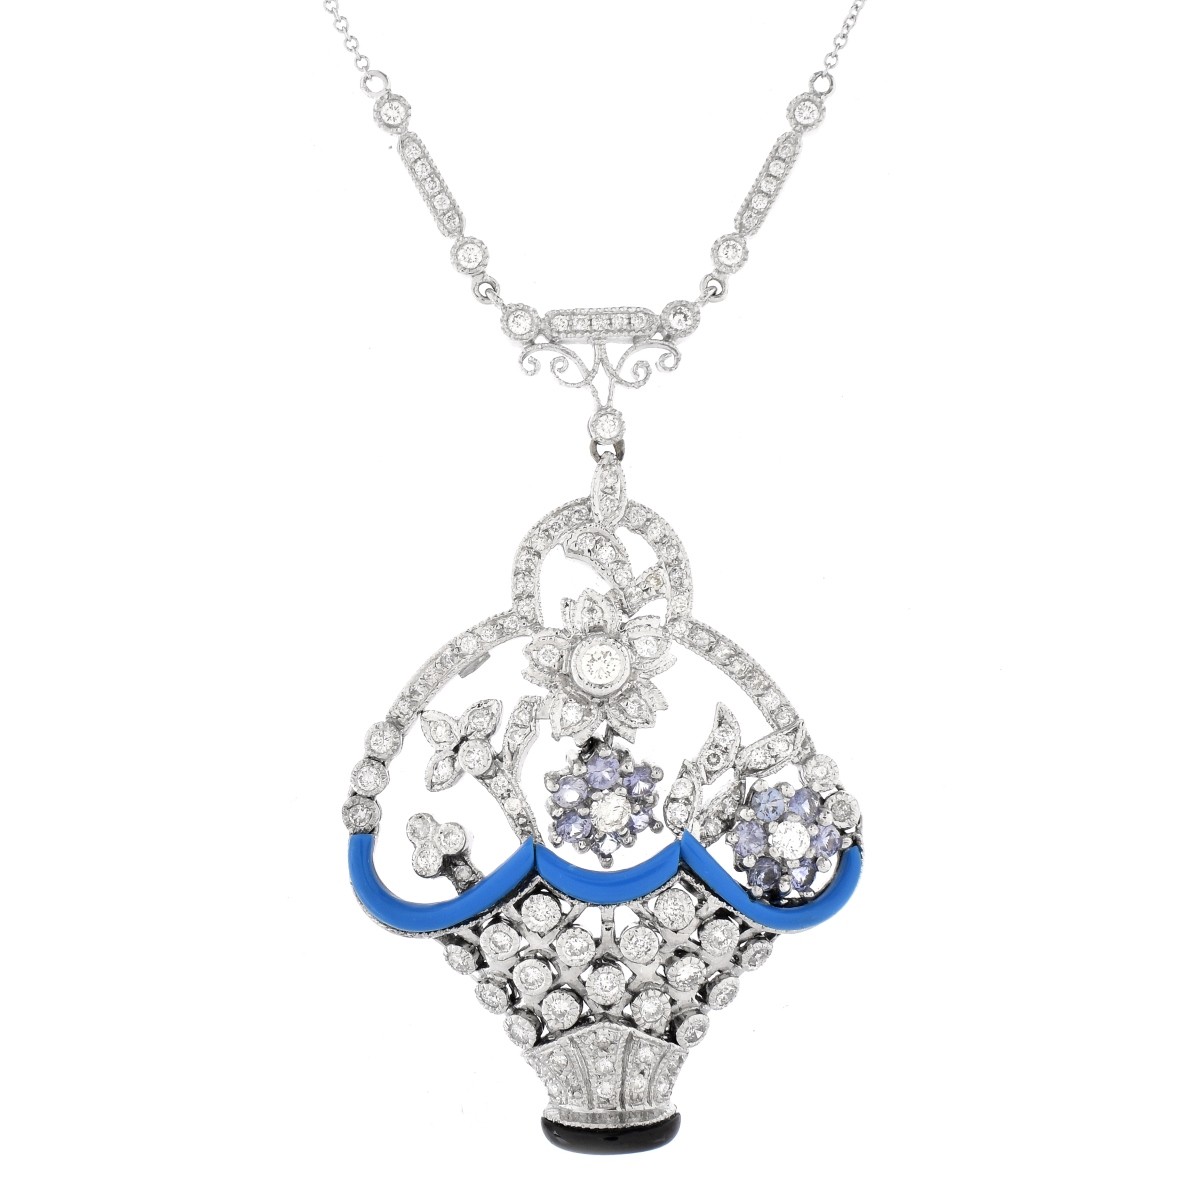 Diamond, Sapphire and 18K Gold Necklace